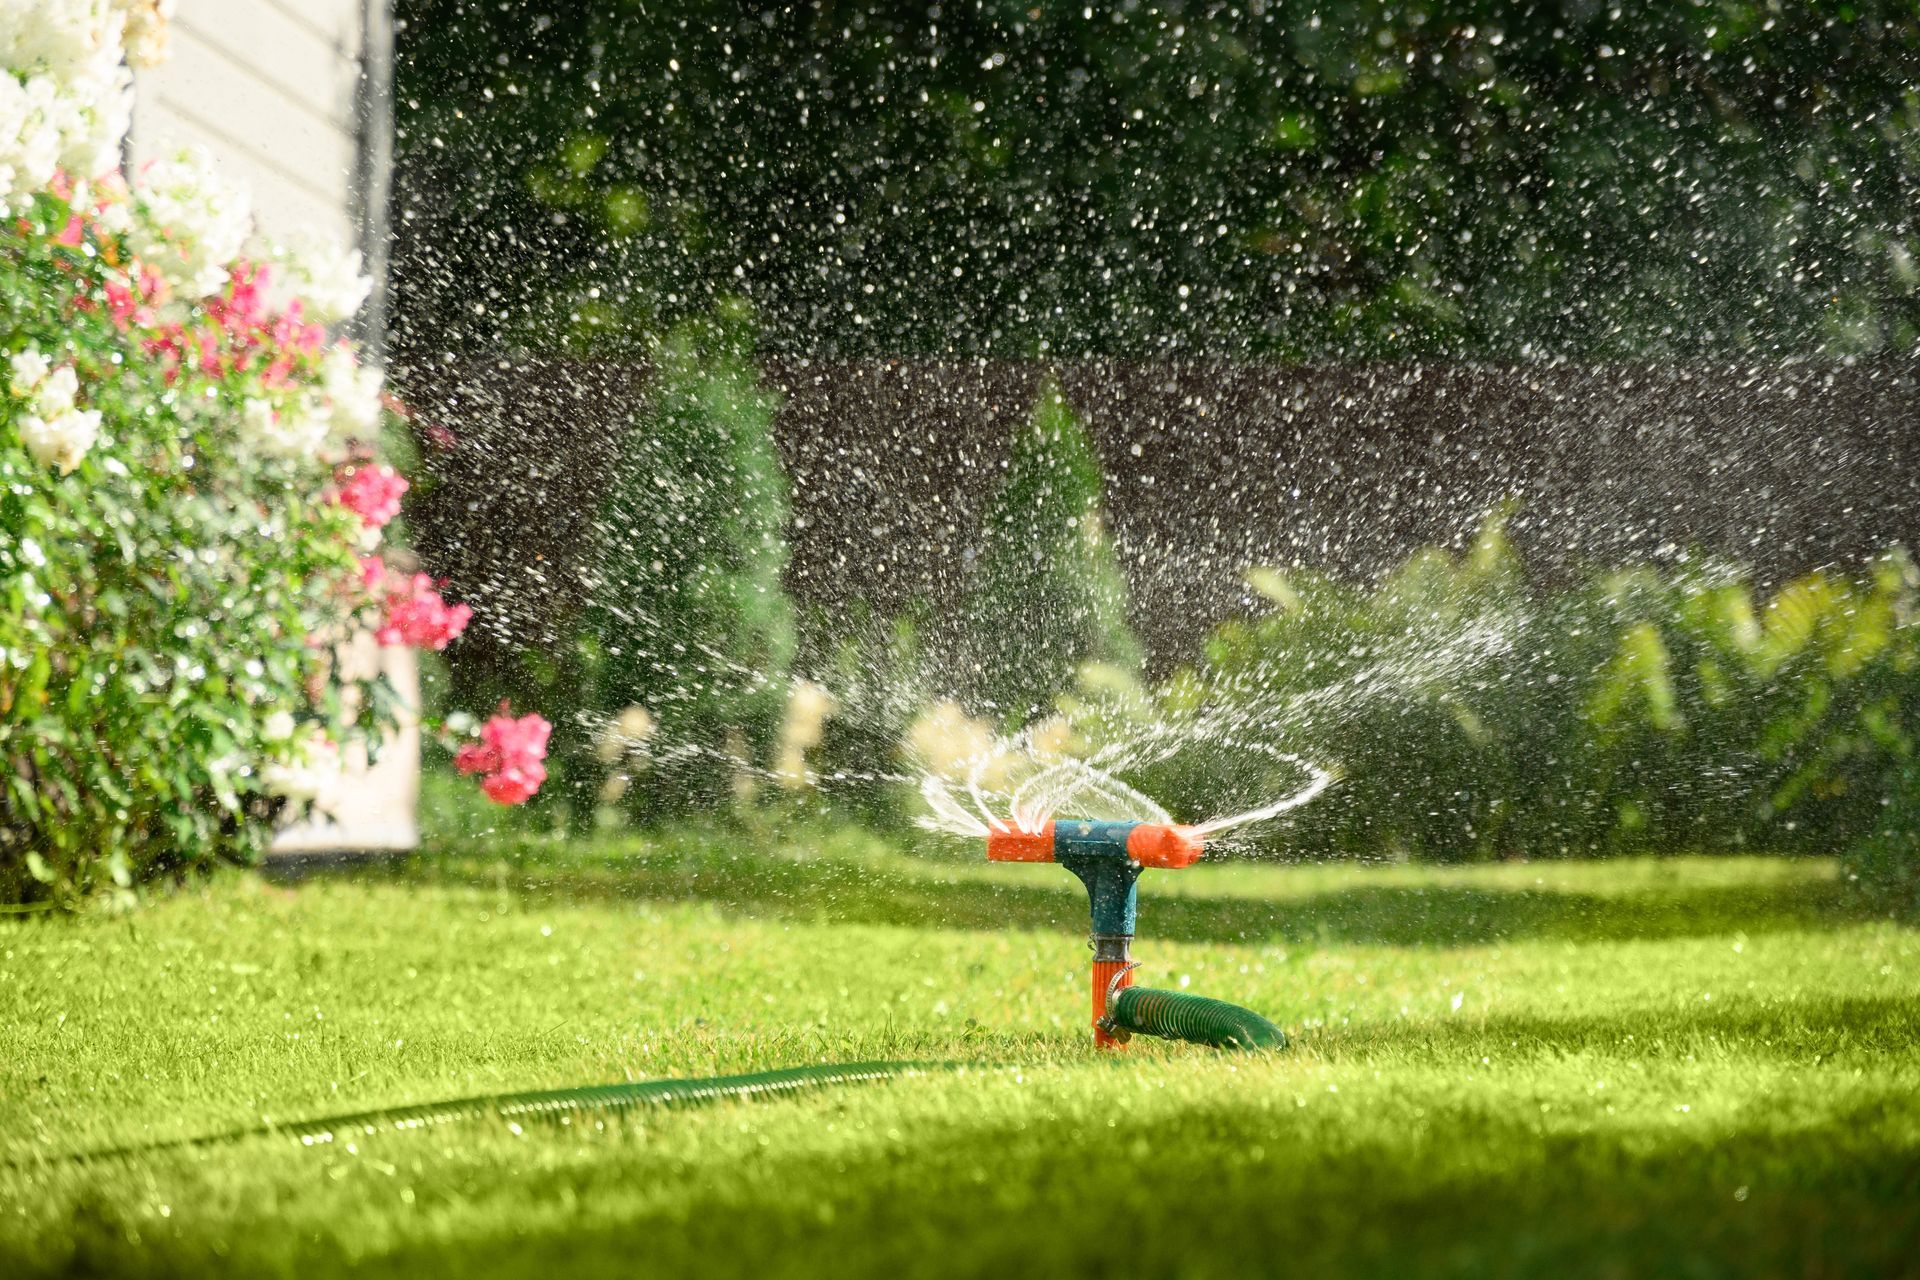 a sprinkler is spraying water on a lush green lawn .